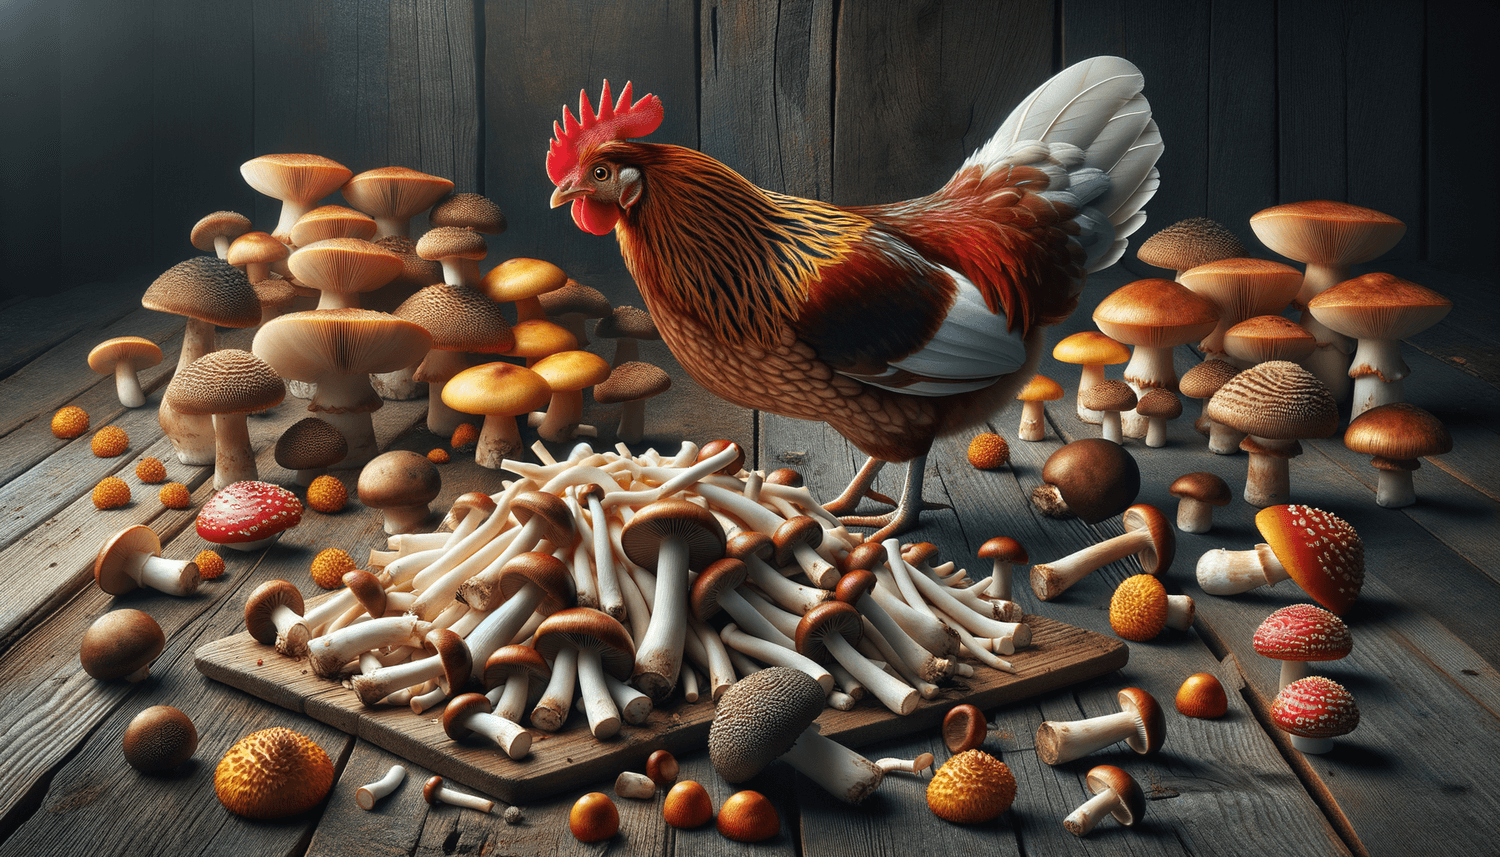 Can Chickens Eat Mushrooms Stems?